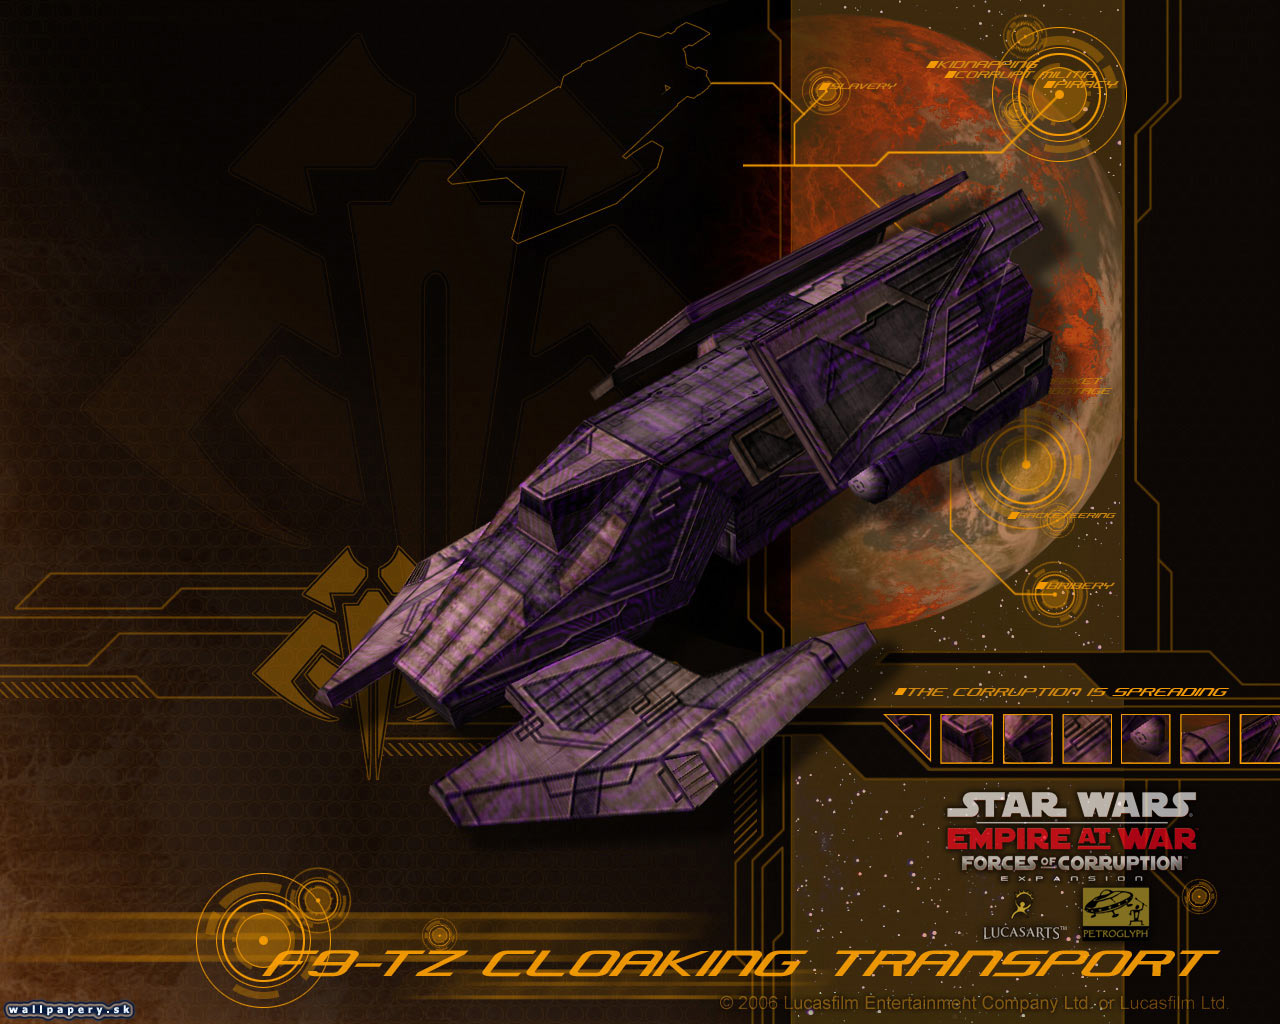 Star Wars: Empire At War - Forces of Corruption - wallpaper 12